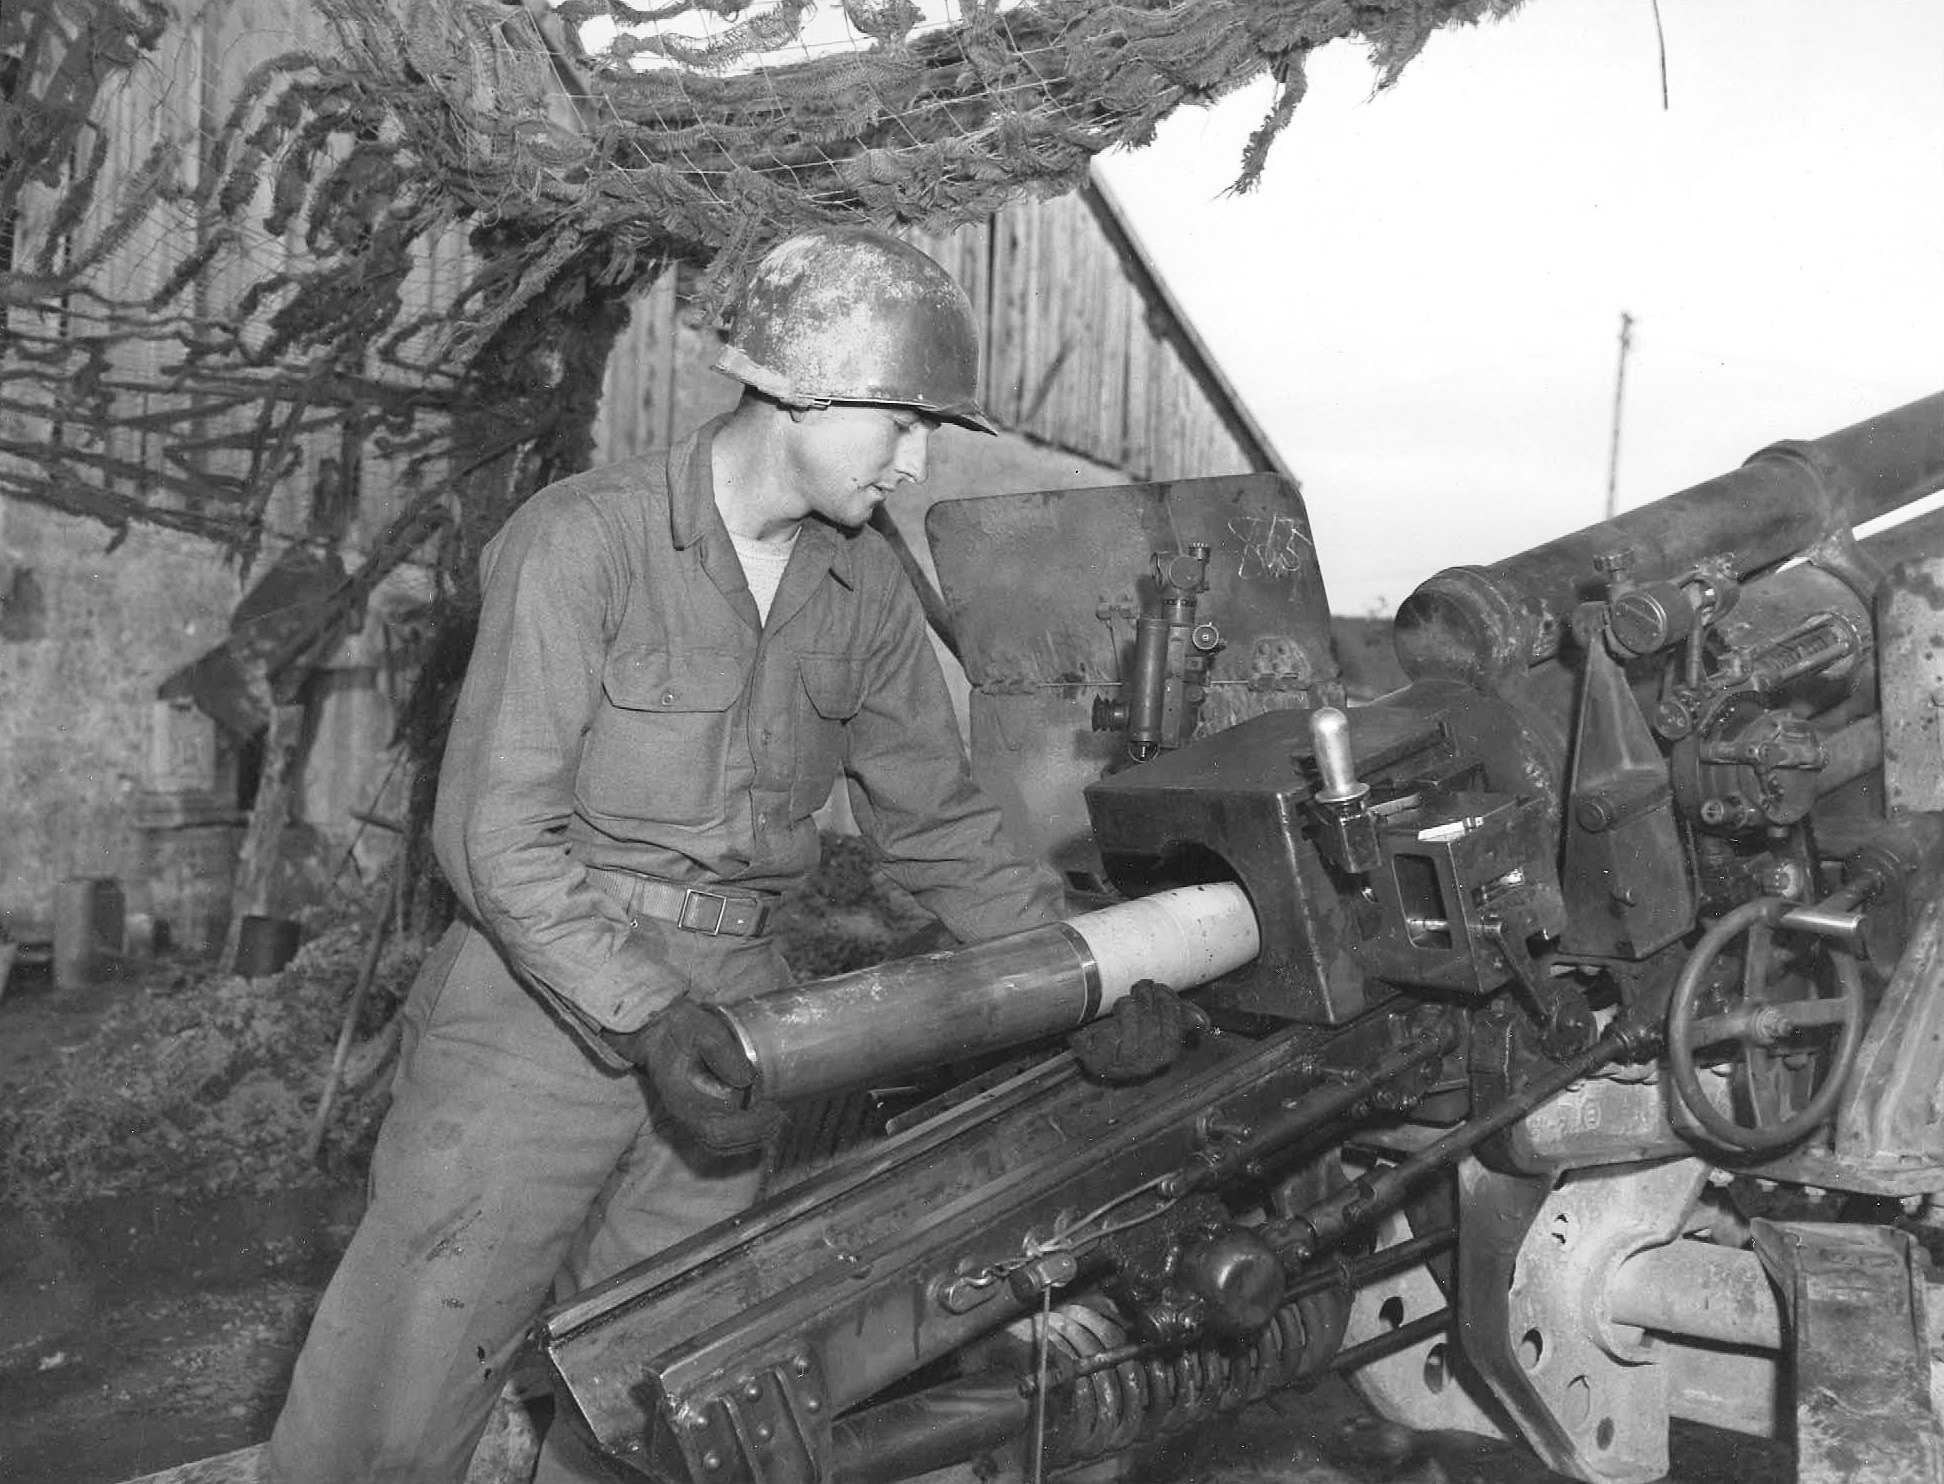 A member of the 131st Field Artillery Battalion loading a 105mm shell packed with D-ration chocolate bars for an infantry battalion cut off in the Belmont Sector, France, 29 Oct 1944